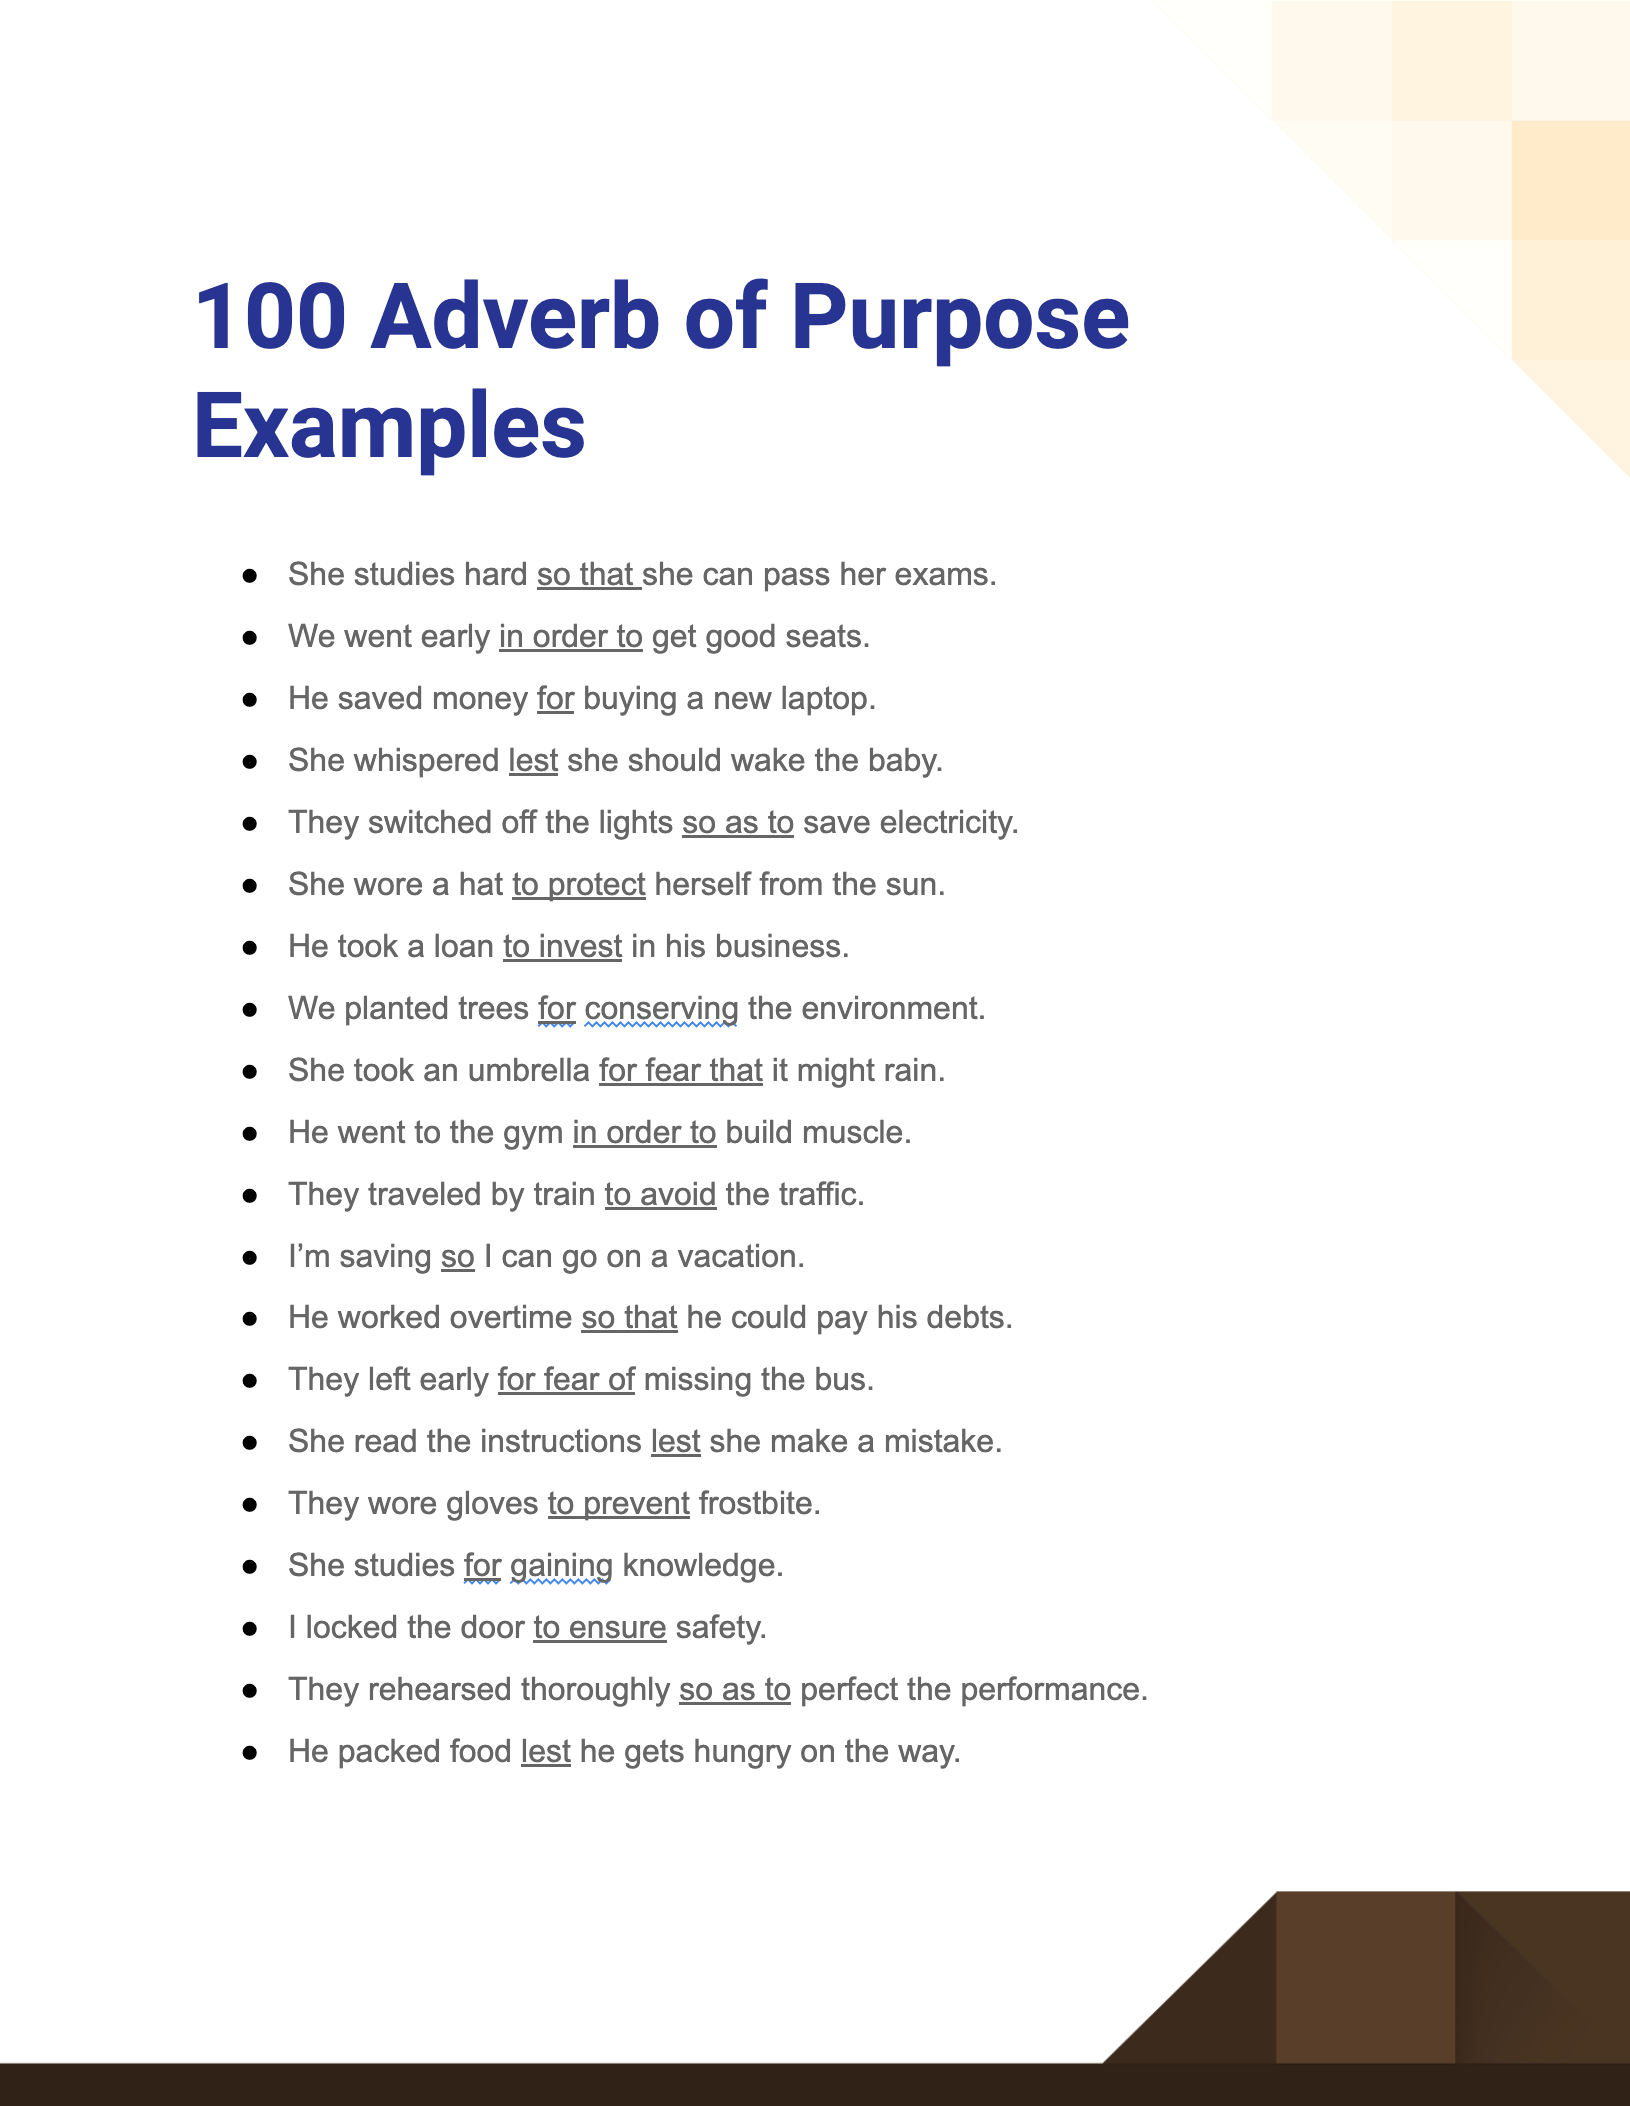 100-adverb-of-place-examples-examples-how-to-use-tips-write-75